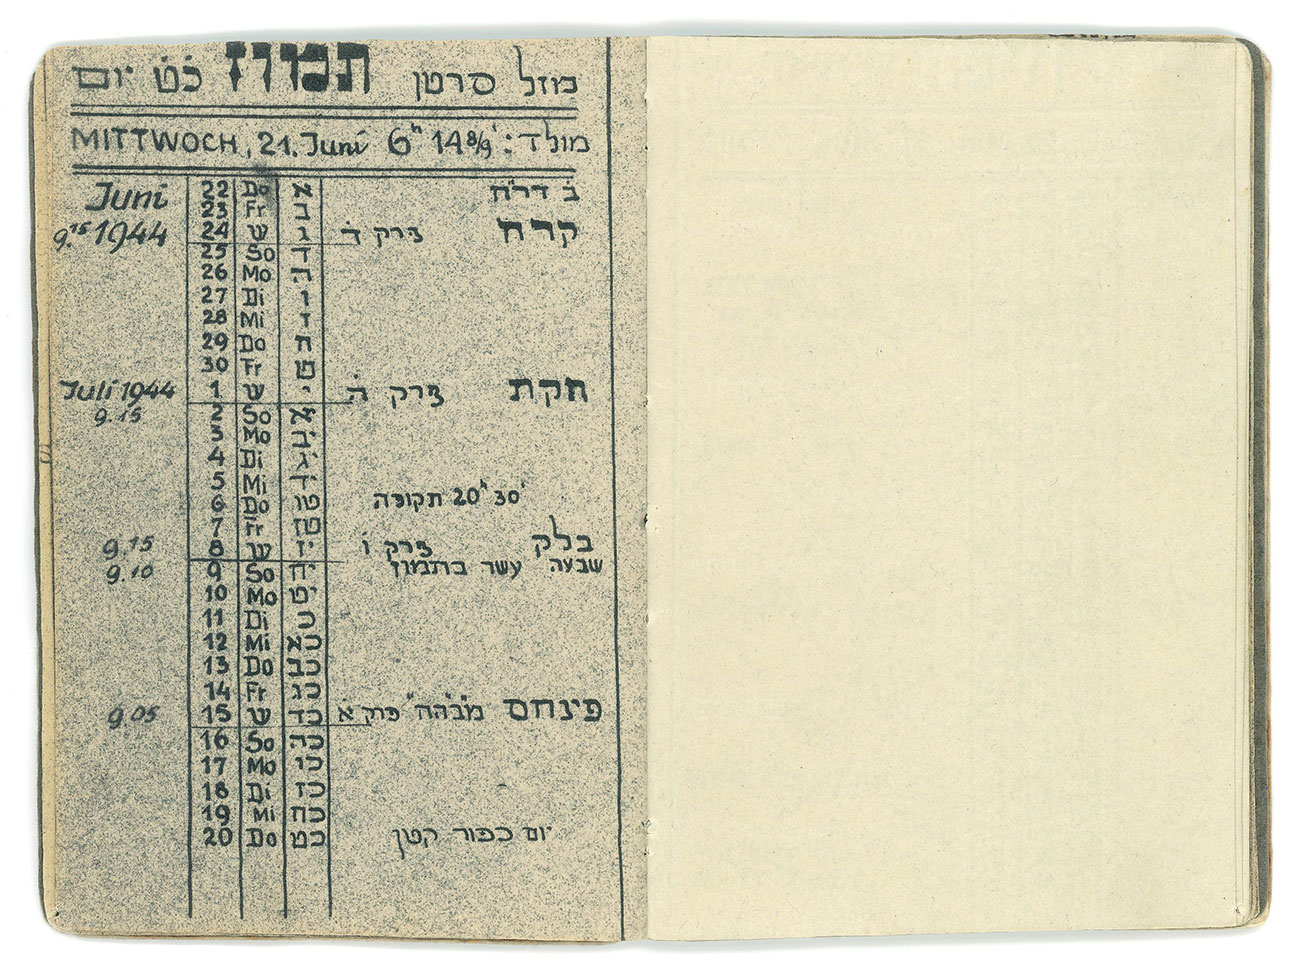 A calendar for the Jewish Year 5704 (1943-44) that was made and reproduced by Asher Berlinger in Theresienstadt